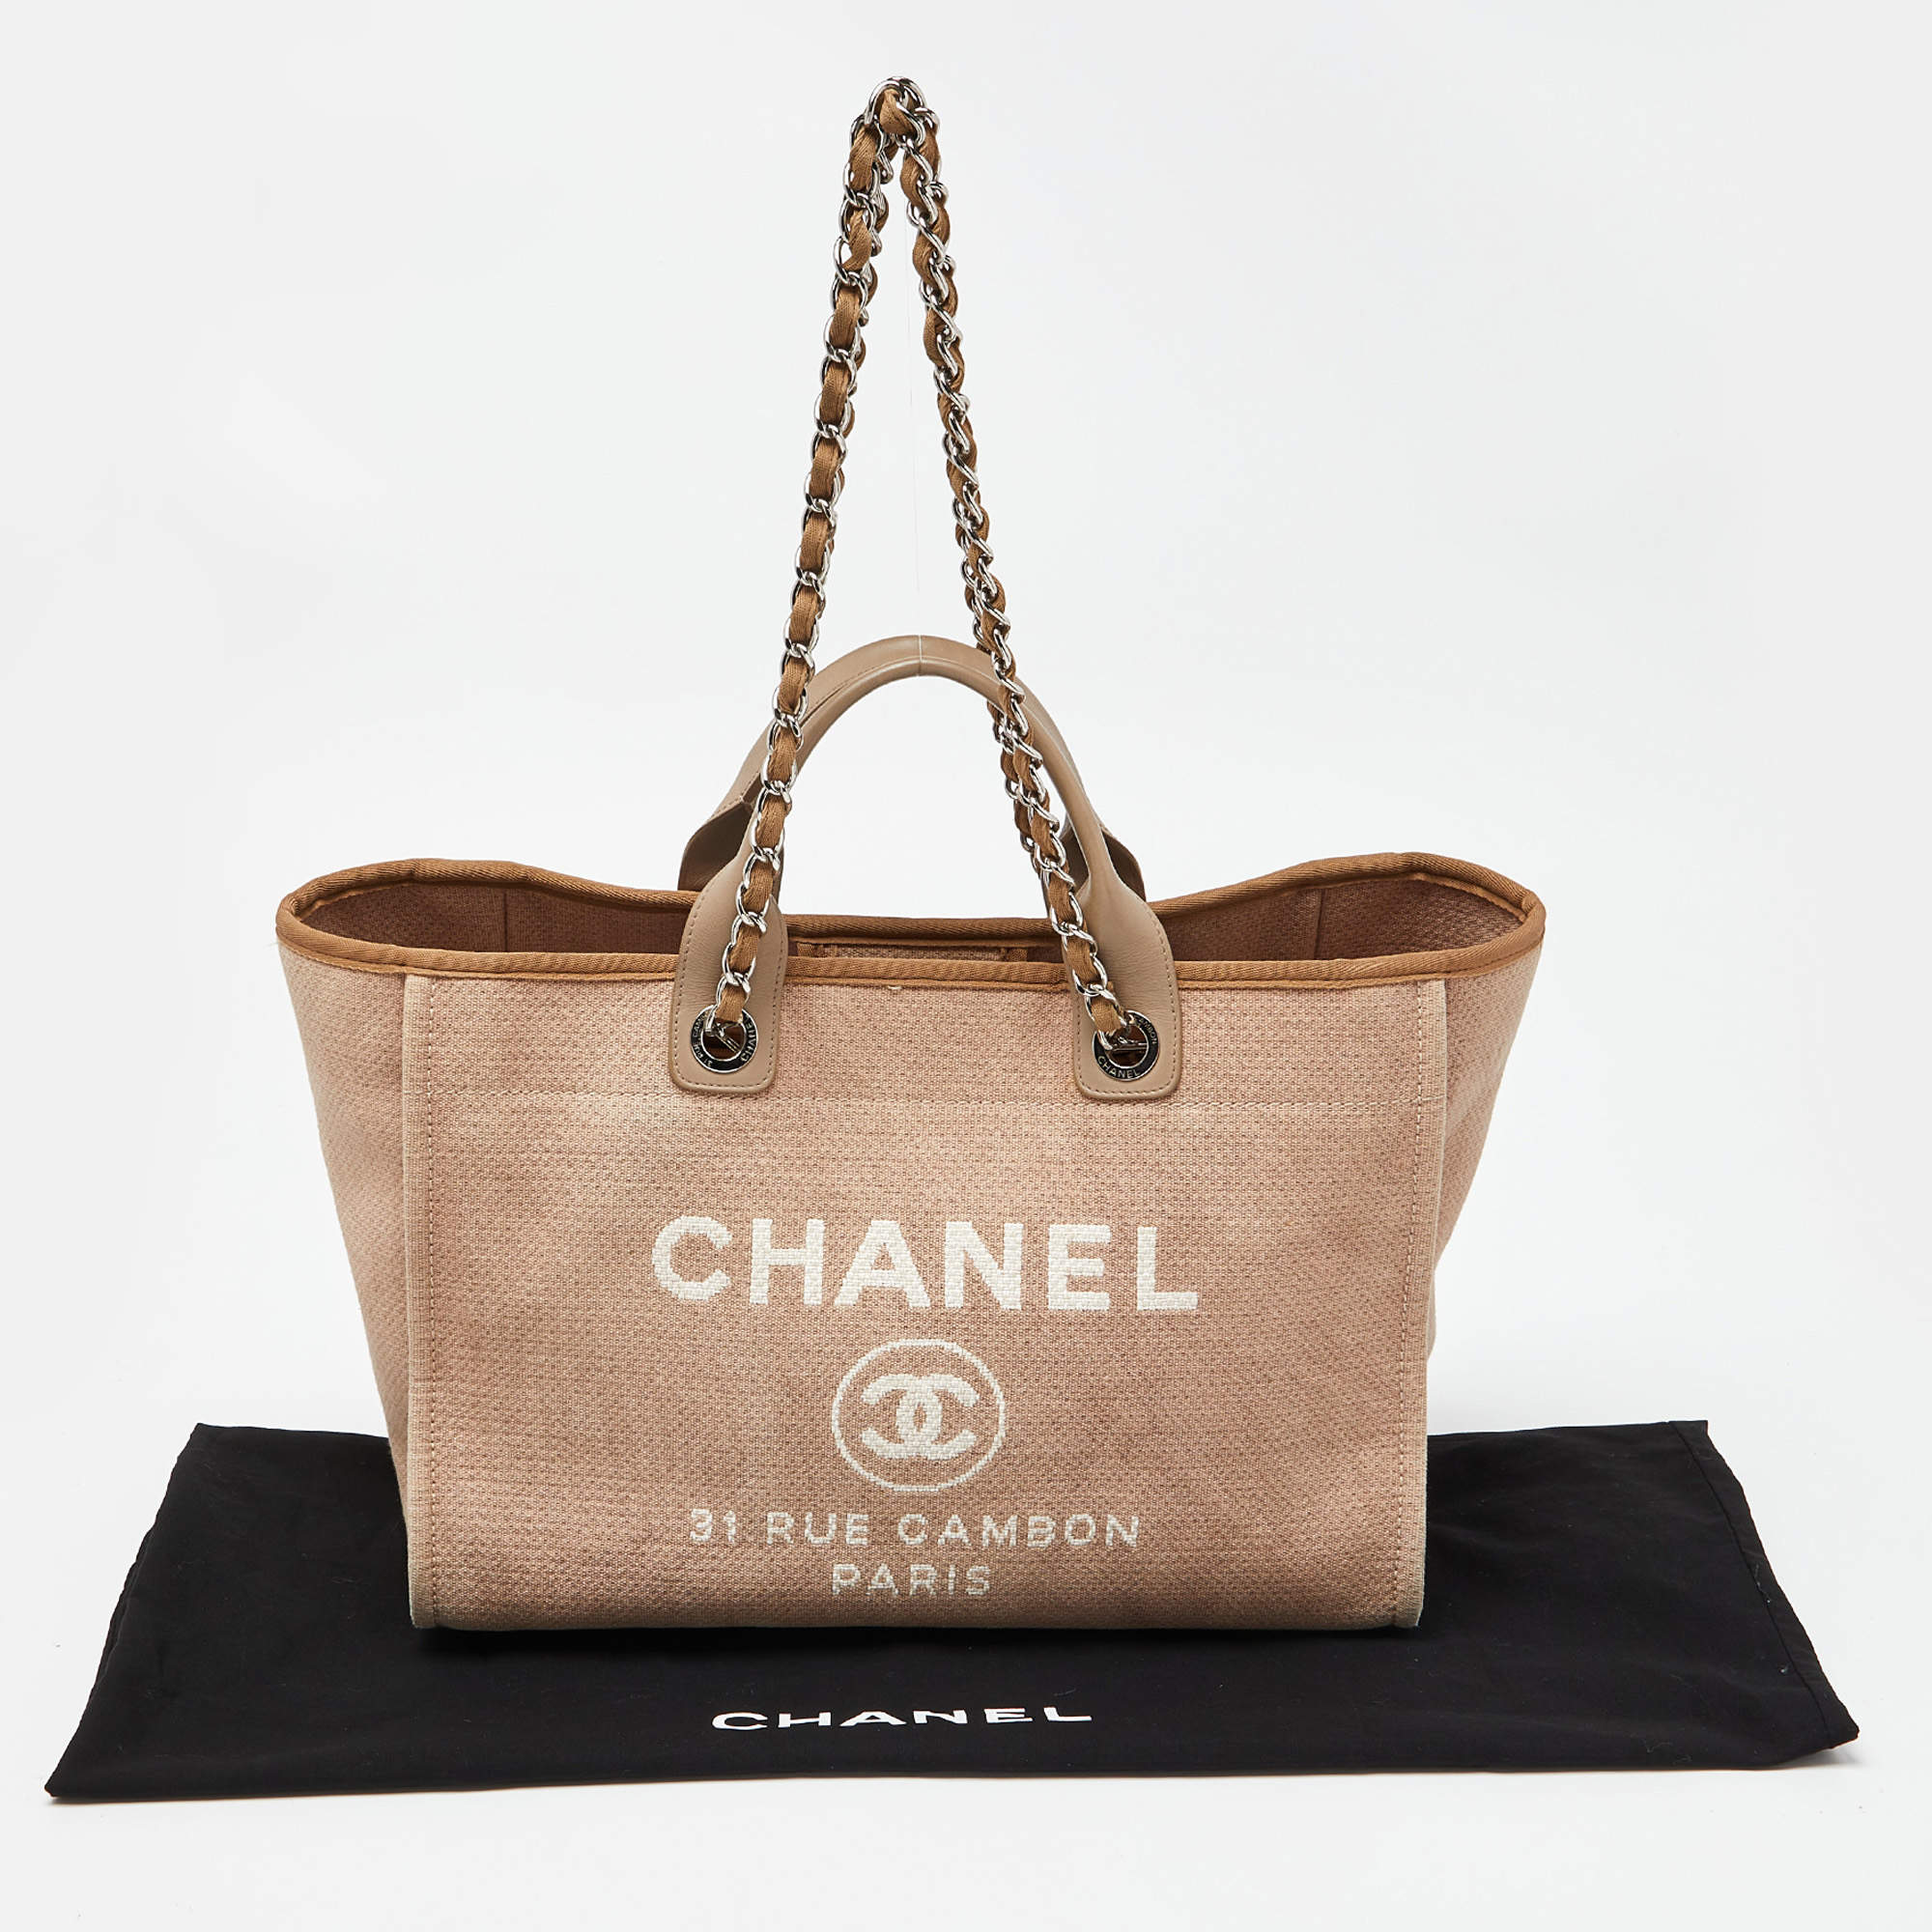 Chanel Large Deauville Shopping Bag - Neutrals Totes, Handbags - CHA922881